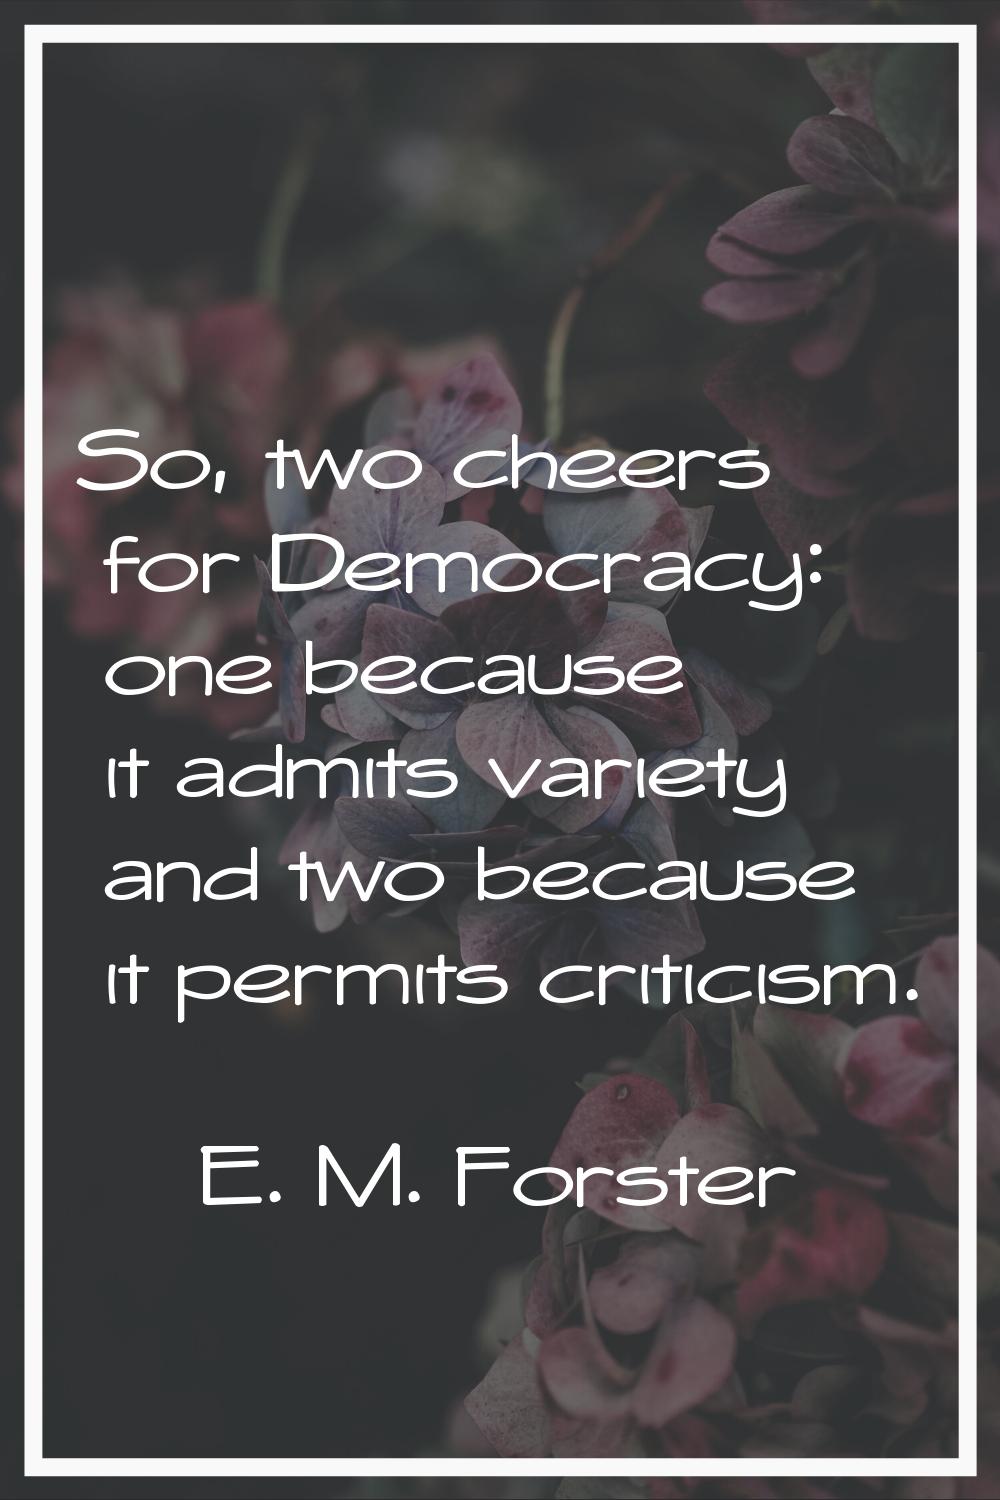 So, two cheers for Democracy: one because it admits variety and two because it permits criticism.